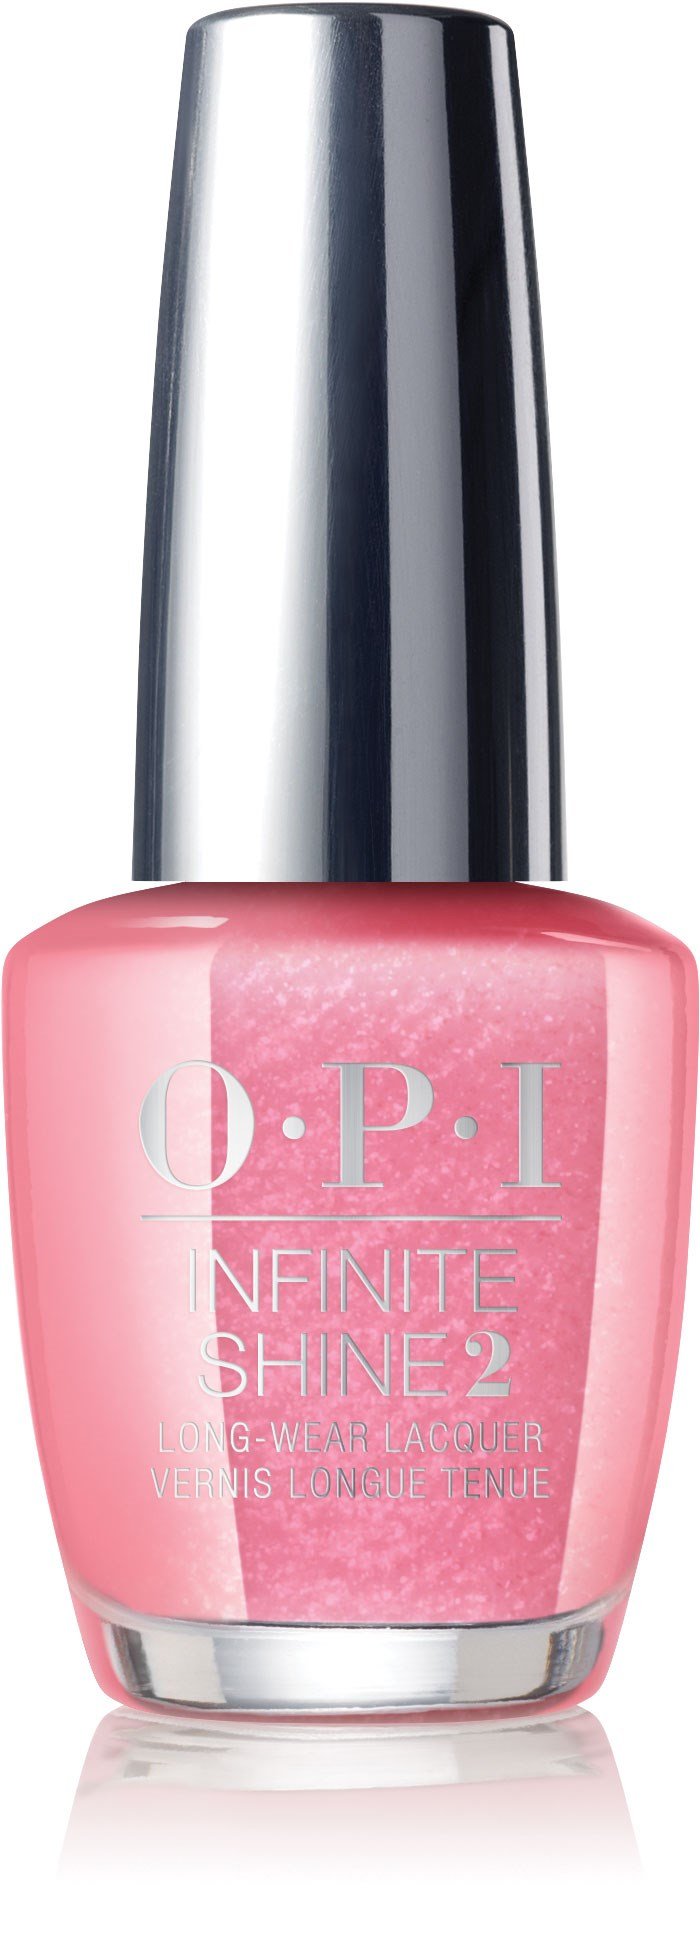 OPI Infinite Shine - Cozu-Melted in The Sun